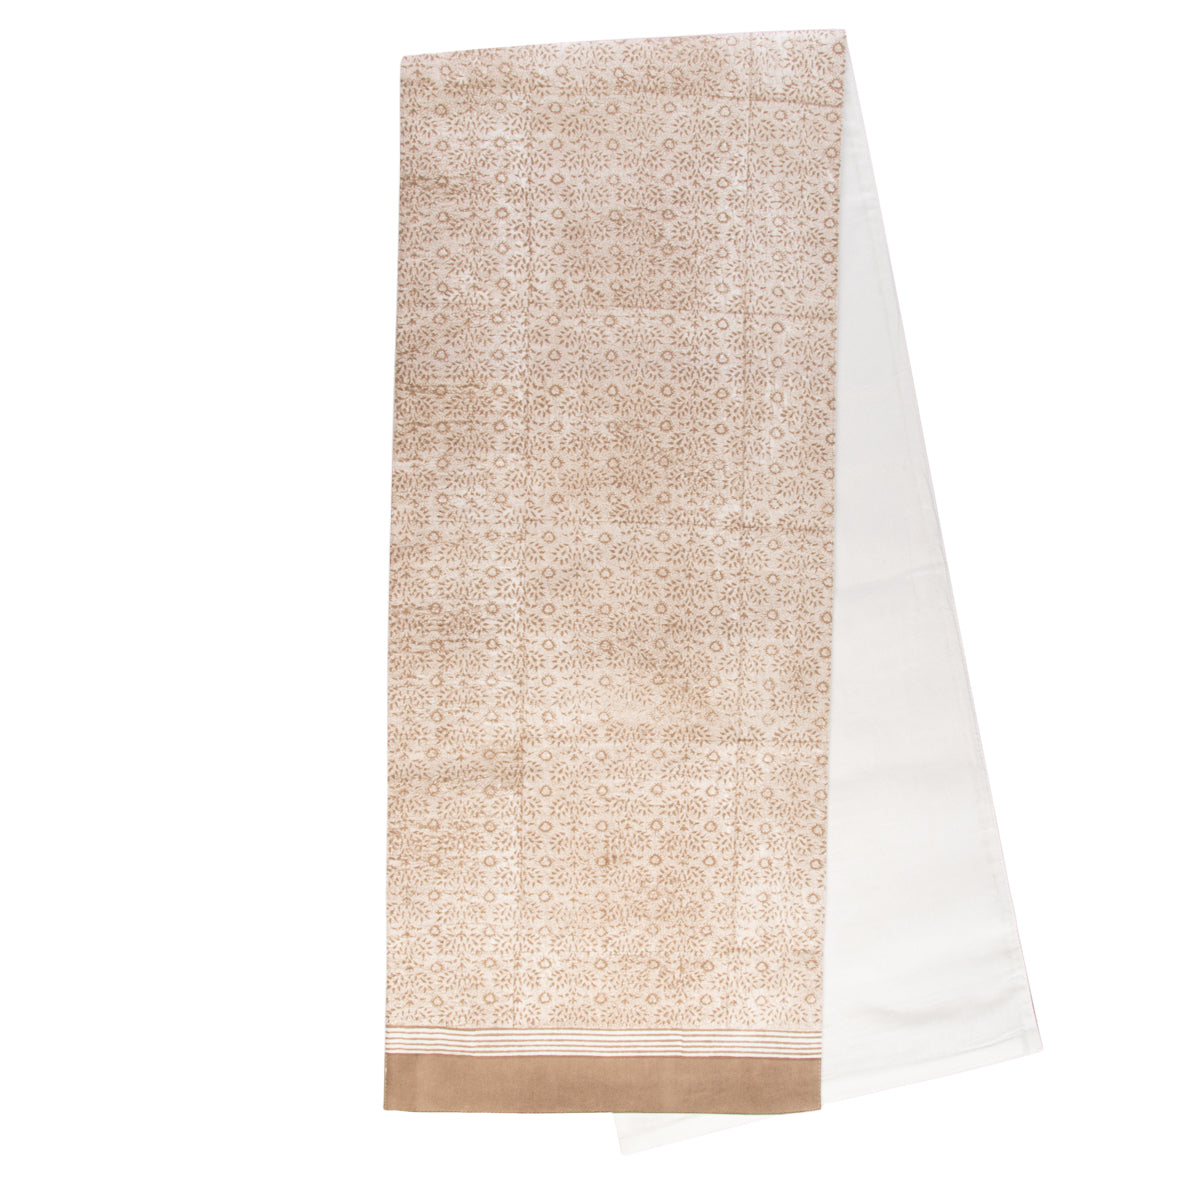 72” Table Runner By Tag – Natural Fabric Table Protector & Décor